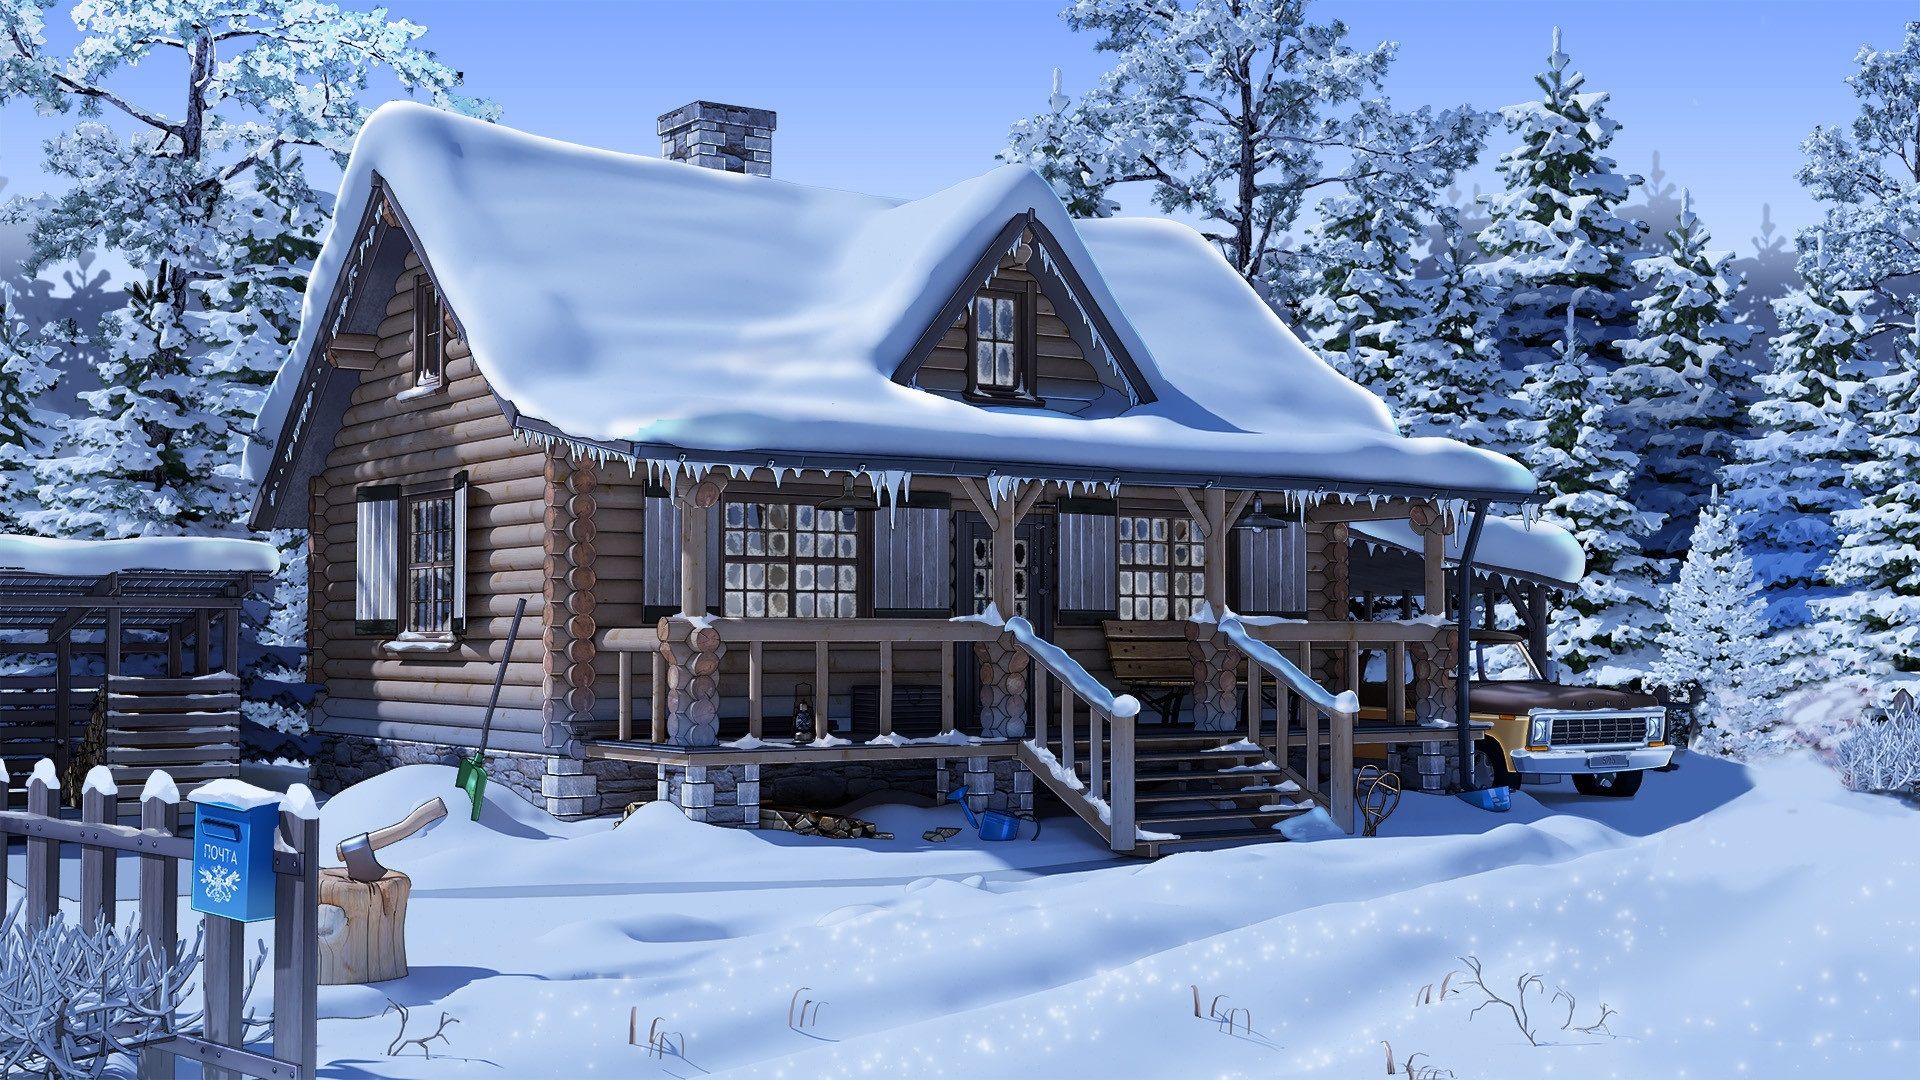 Wallpaper Snow, house, trees, car, anime 1920x1080 Full HD 2K Picture, Image